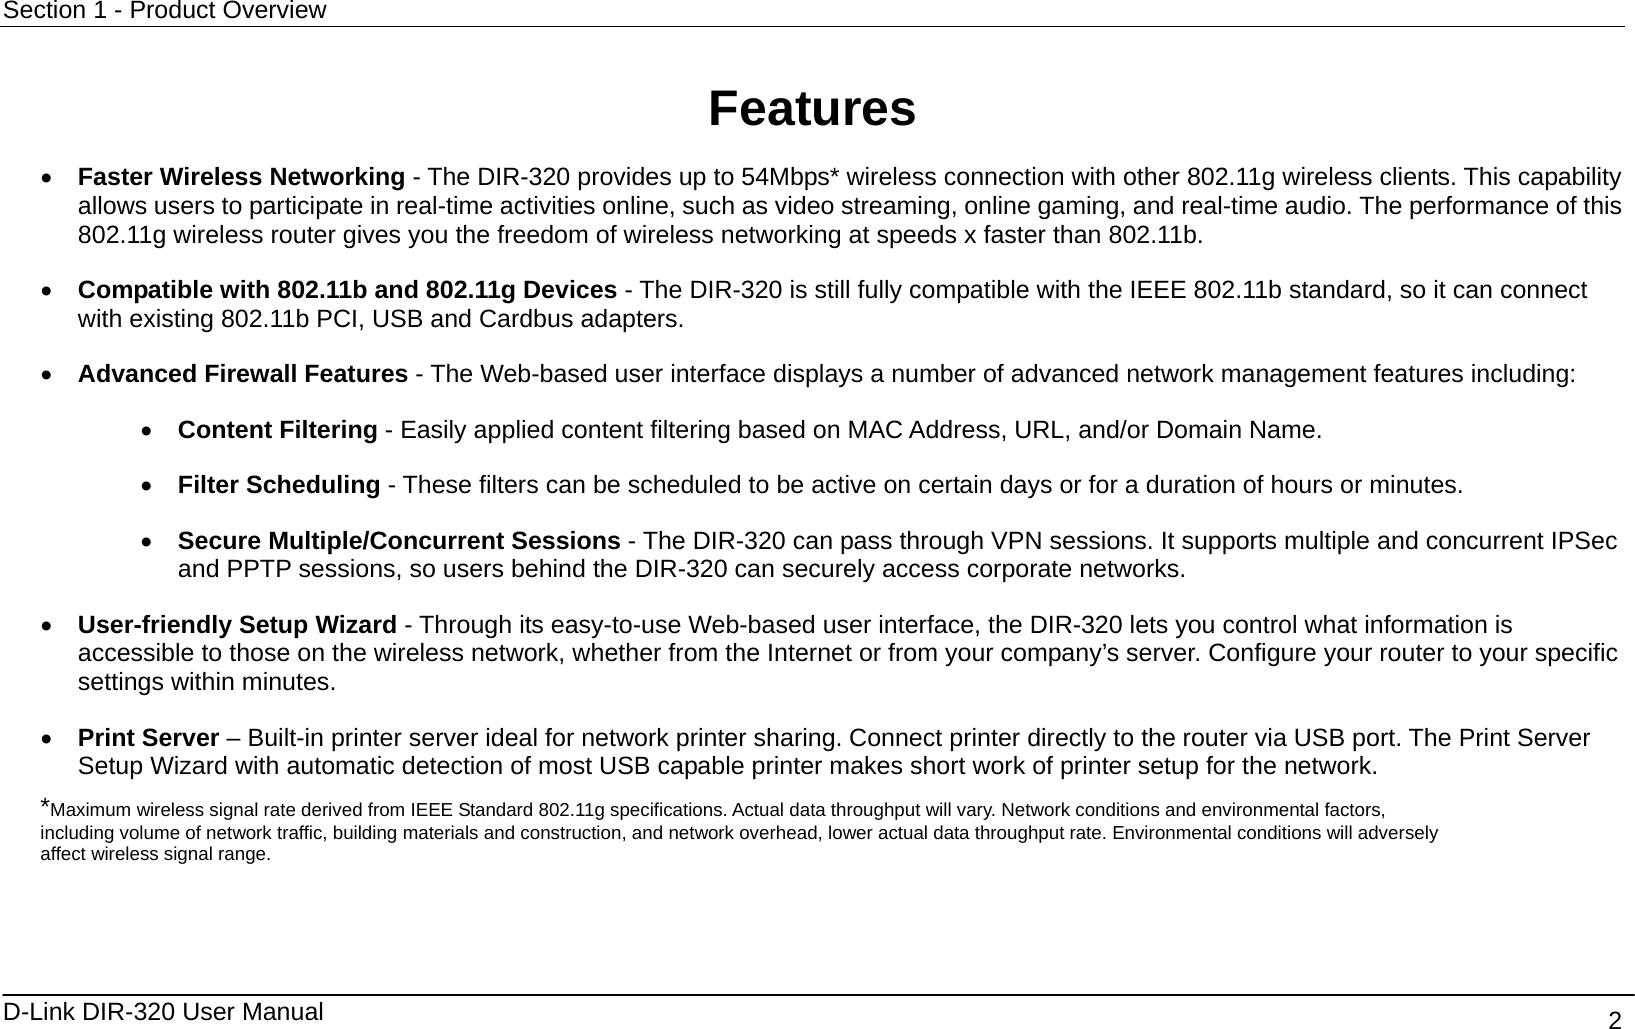 Section 1 - Product Overview  D-Link DIR-320 User Manual                                       2  Features •  Faster Wireless Networking - The DIR-320 provides up to 54Mbps* wireless connection with other 802.11g wireless clients. This capability allows users to participate in real-time activities online, such as video streaming, online gaming, and real-time audio. The performance of this 802.11g wireless router gives you the freedom of wireless networking at speeds x faster than 802.11b. •  Compatible with 802.11b and 802.11g Devices - The DIR-320 is still fully compatible with the IEEE 802.11b standard, so it can connect with existing 802.11b PCI, USB and Cardbus adapters. •  Advanced Firewall Features - The Web-based user interface displays a number of advanced network management features including: •  Content Filtering - Easily applied content filtering based on MAC Address, URL, and/or Domain Name. •  Filter Scheduling - These filters can be scheduled to be active on certain days or for a duration of hours or minutes. •  Secure Multiple/Concurrent Sessions - The DIR-320 can pass through VPN sessions. It supports multiple and concurrent IPSec and PPTP sessions, so users behind the DIR-320 can securely access corporate networks. •  User-friendly Setup Wizard - Through its easy-to-use Web-based user interface, the DIR-320 lets you control what information is accessible to those on the wireless network, whether from the Internet or from your company’s server. Configure your router to your specific settings within minutes. •  Print Server – Built-in printer server ideal for network printer sharing. Connect printer directly to the router via USB port. The Print Server Setup Wizard with automatic detection of most USB capable printer makes short work of printer setup for the network. *Maximum wireless signal rate derived from IEEE Standard 802.11g specifications. Actual data throughput will vary. Network conditions and environmental factors, including volume of network traffic, building materials and construction, and network overhead, lower actual data throughput rate. Environmental conditions will adversely affect wireless signal range.   